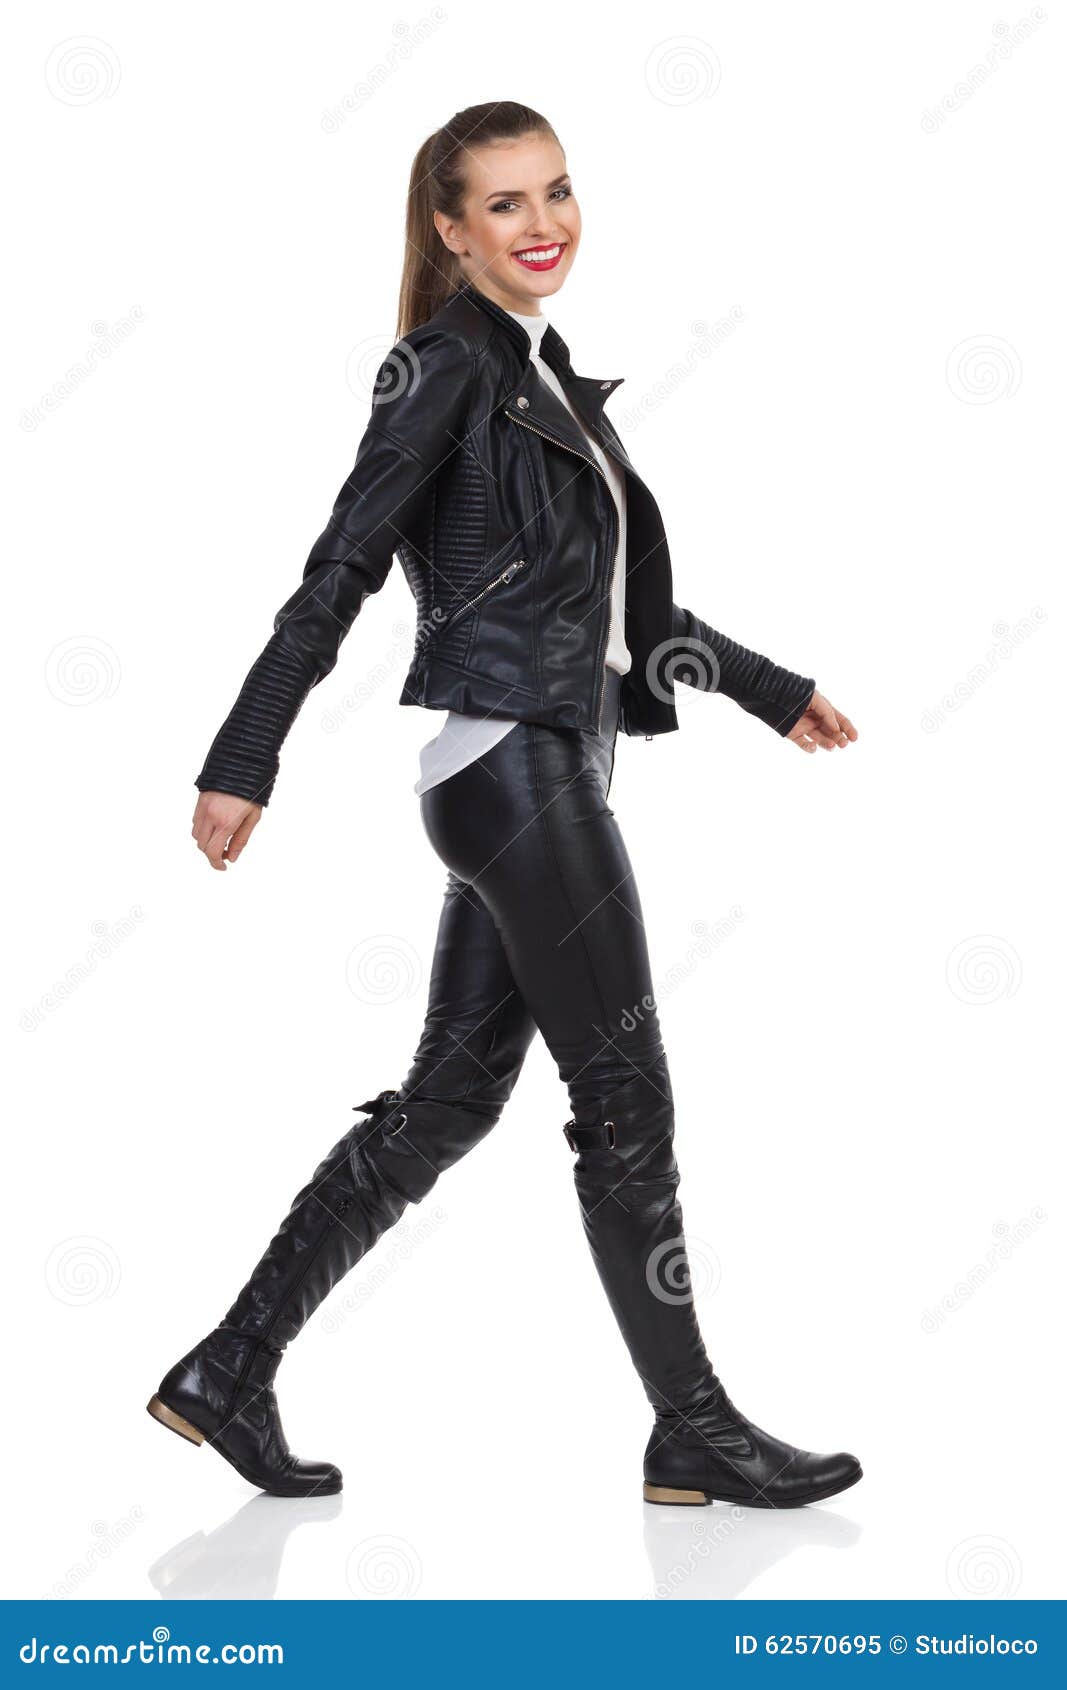 Smiling Girl Walking in Leather Clothes Stock Image - Image of female ...